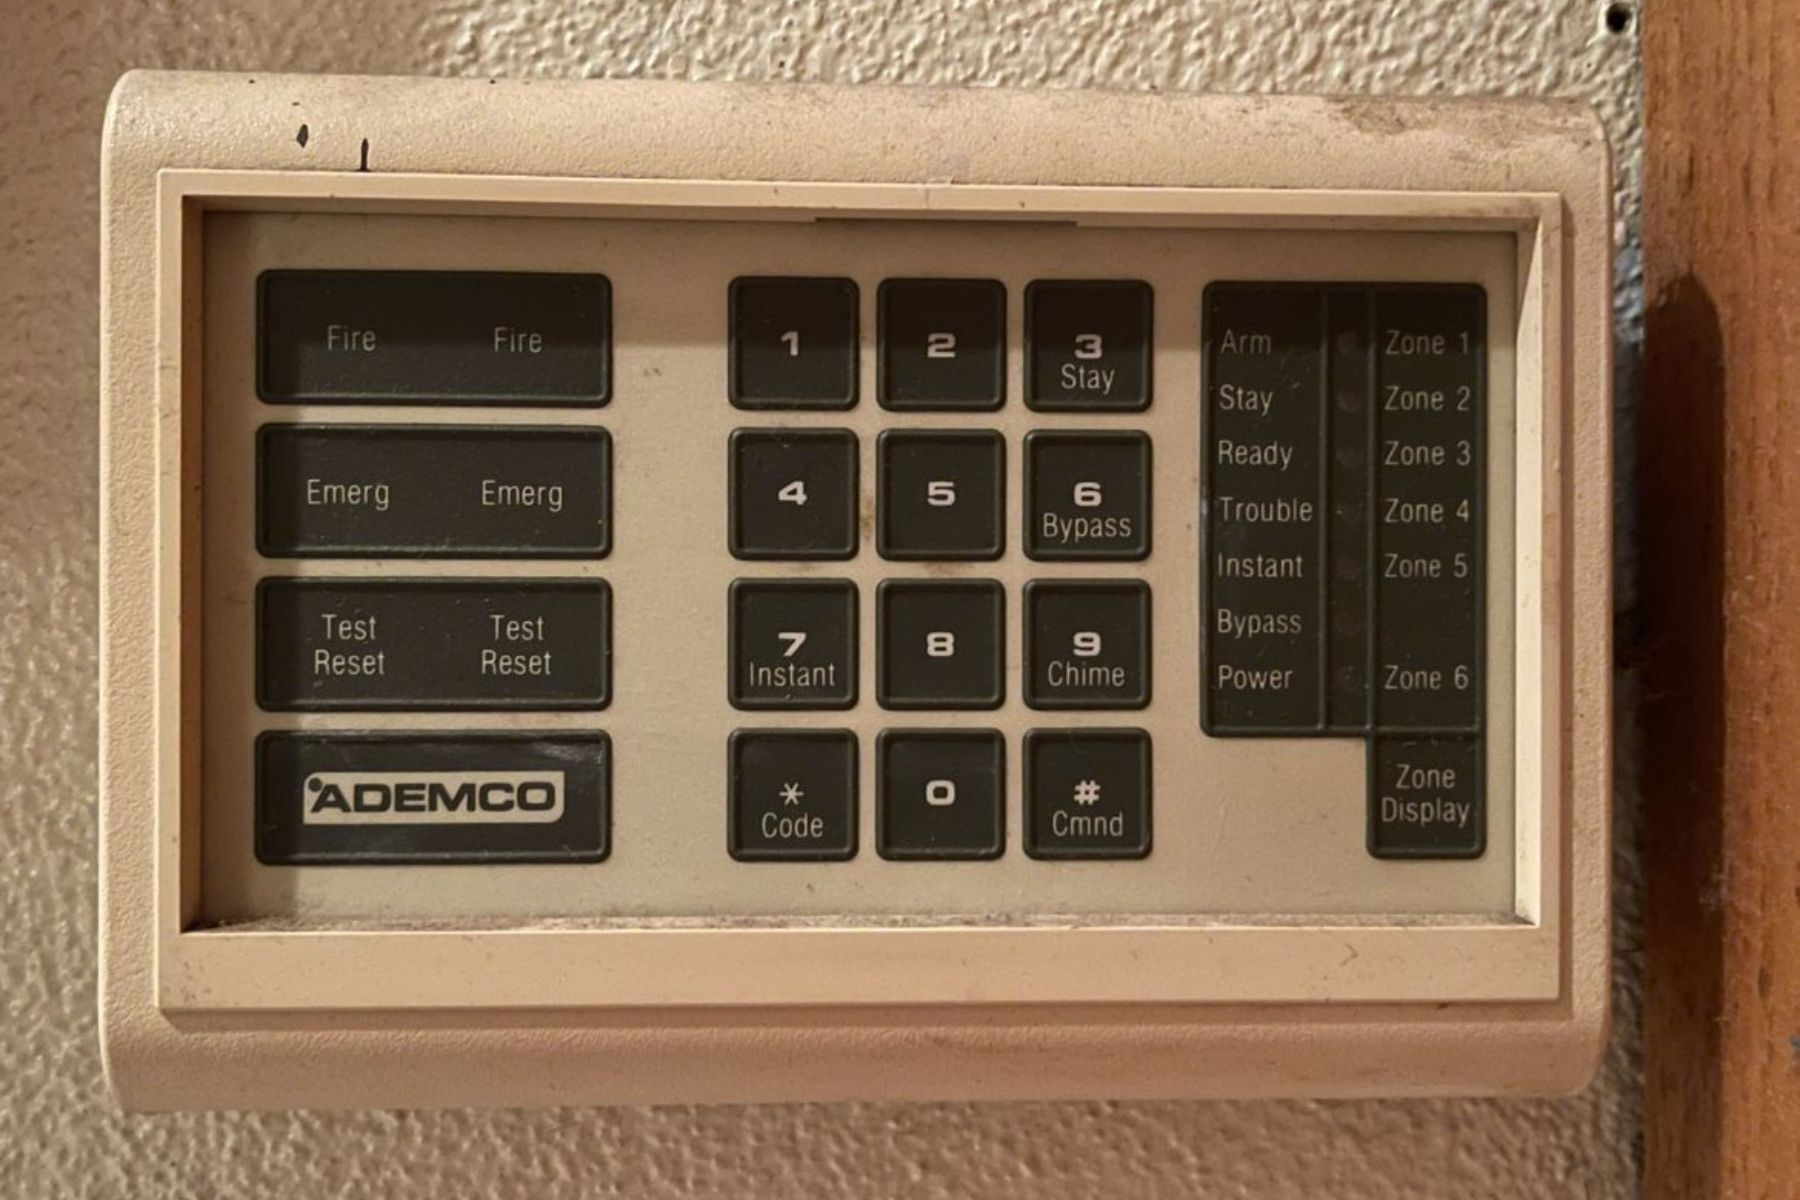 An old outdated alarm keypad that is witness to needing to upgrade security system.